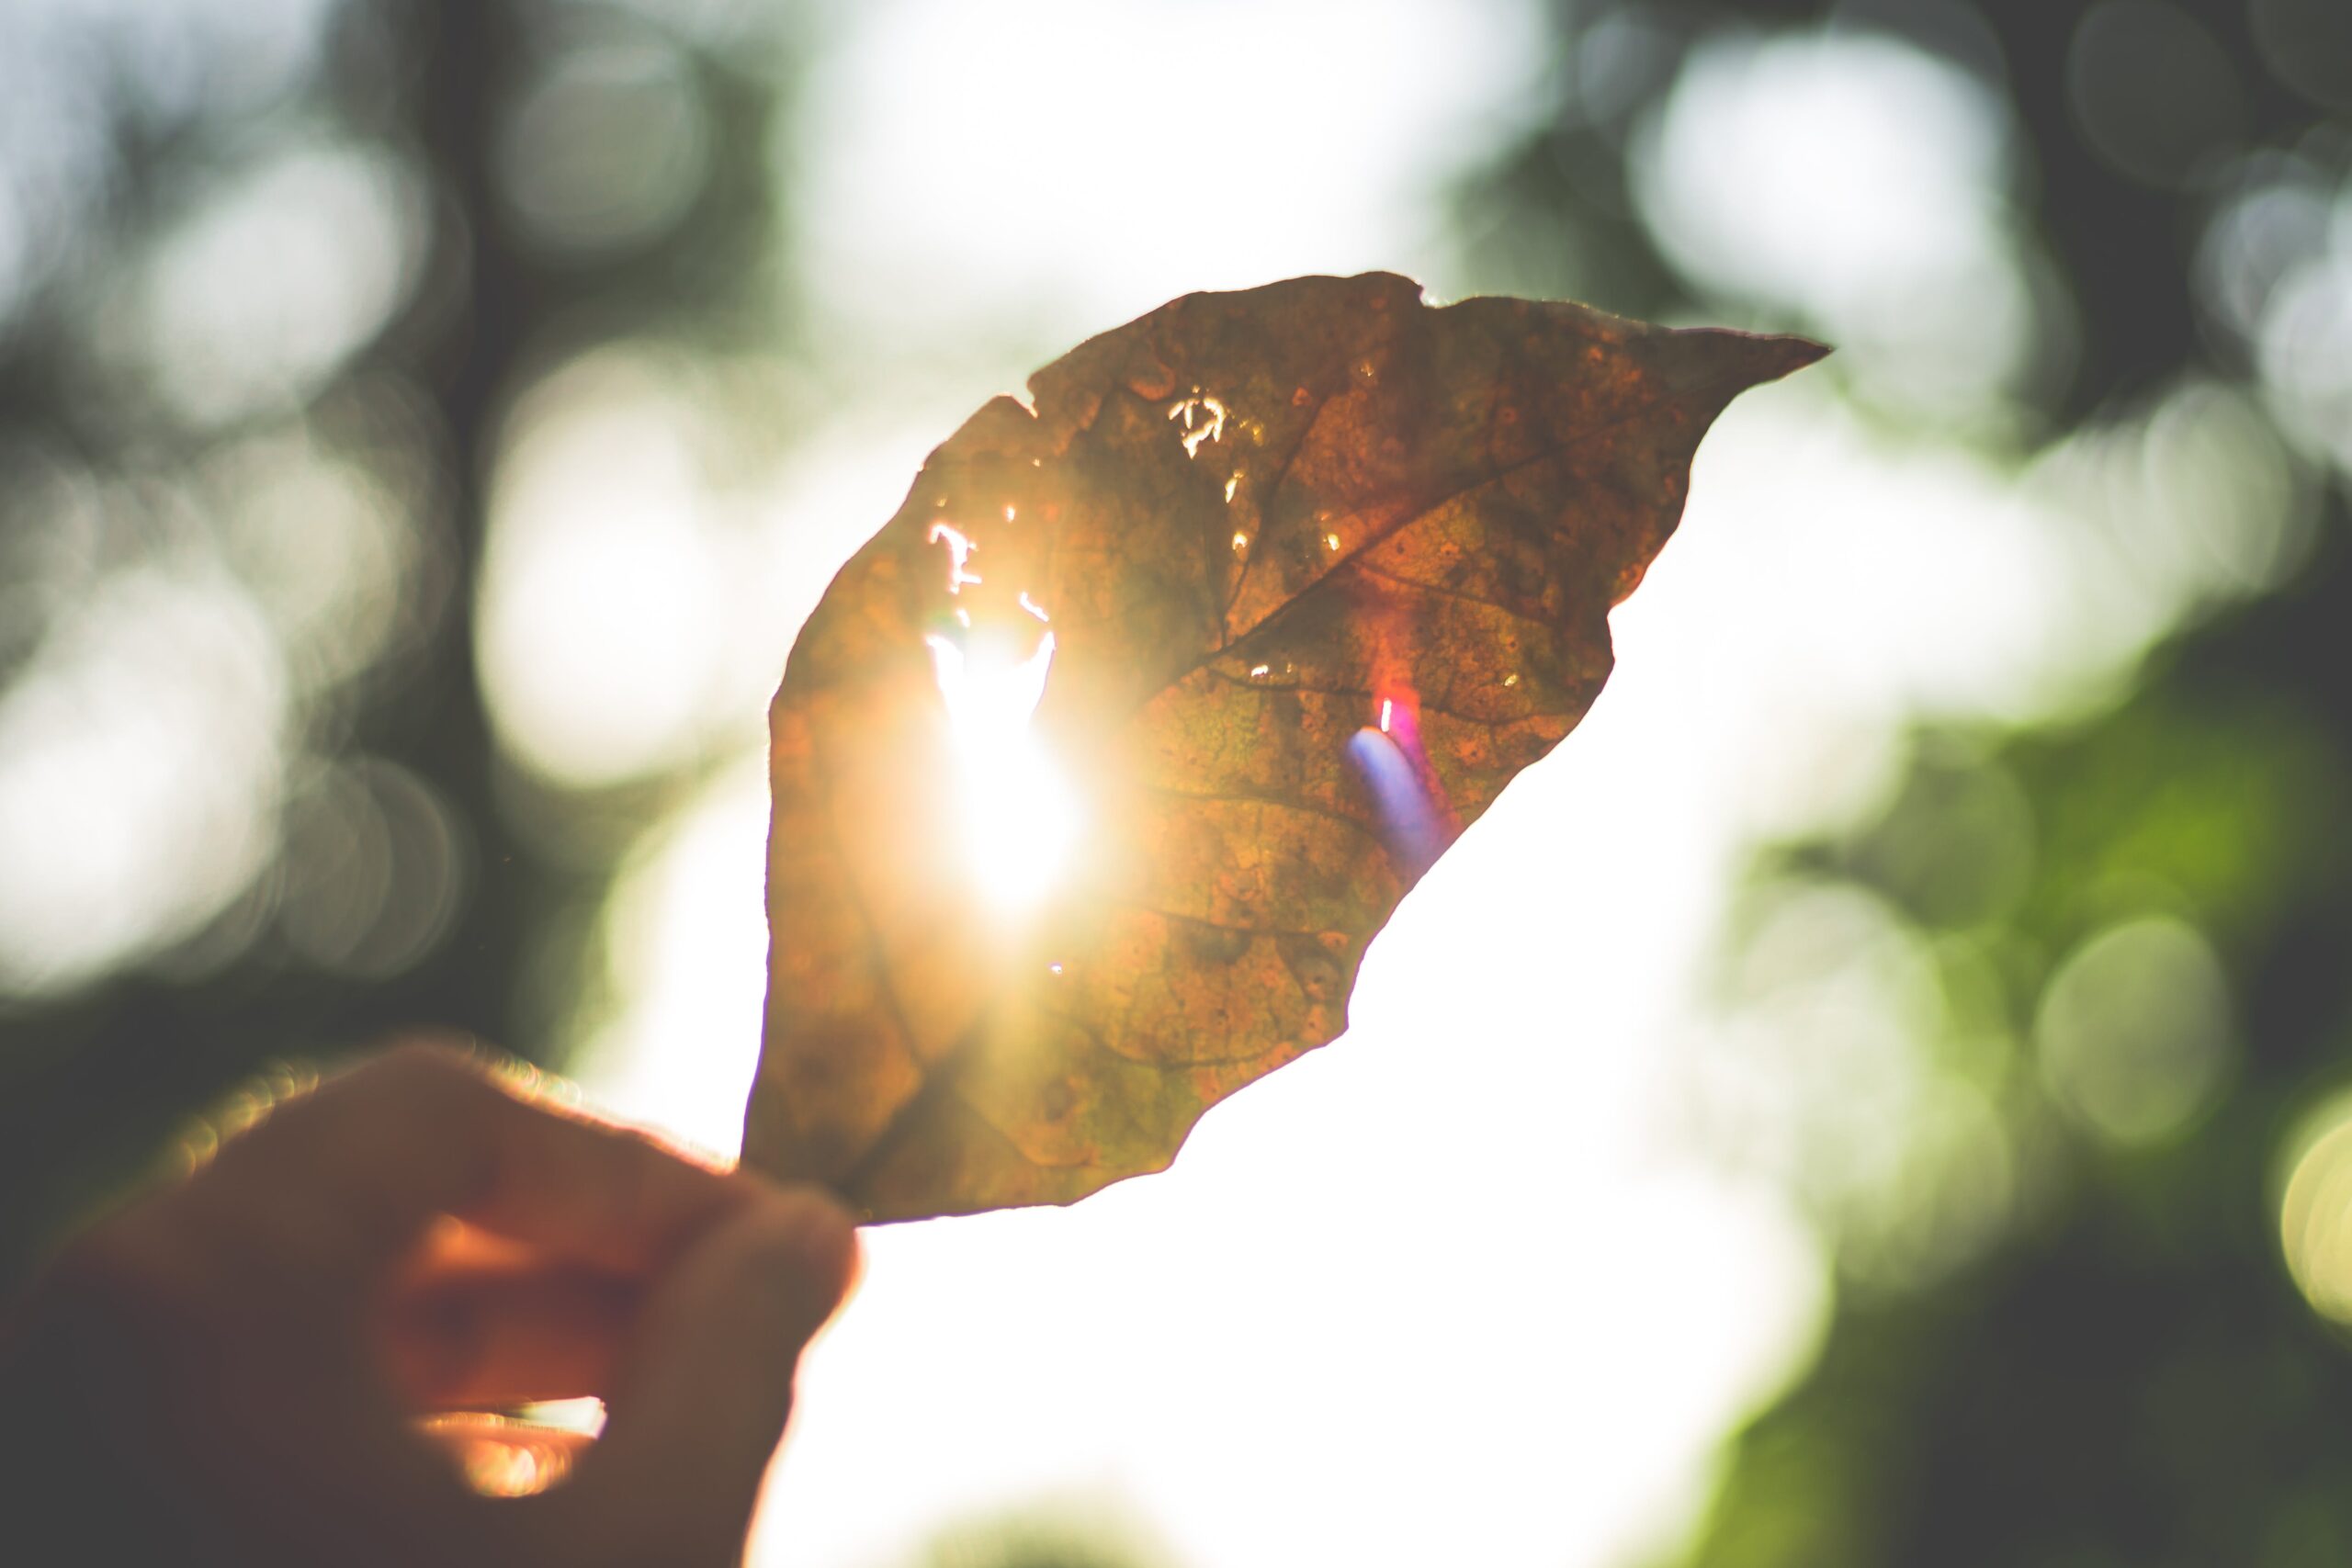 Beautiful shot of an autumnal leaf in nature with the sun shining through to represent enlightenment.